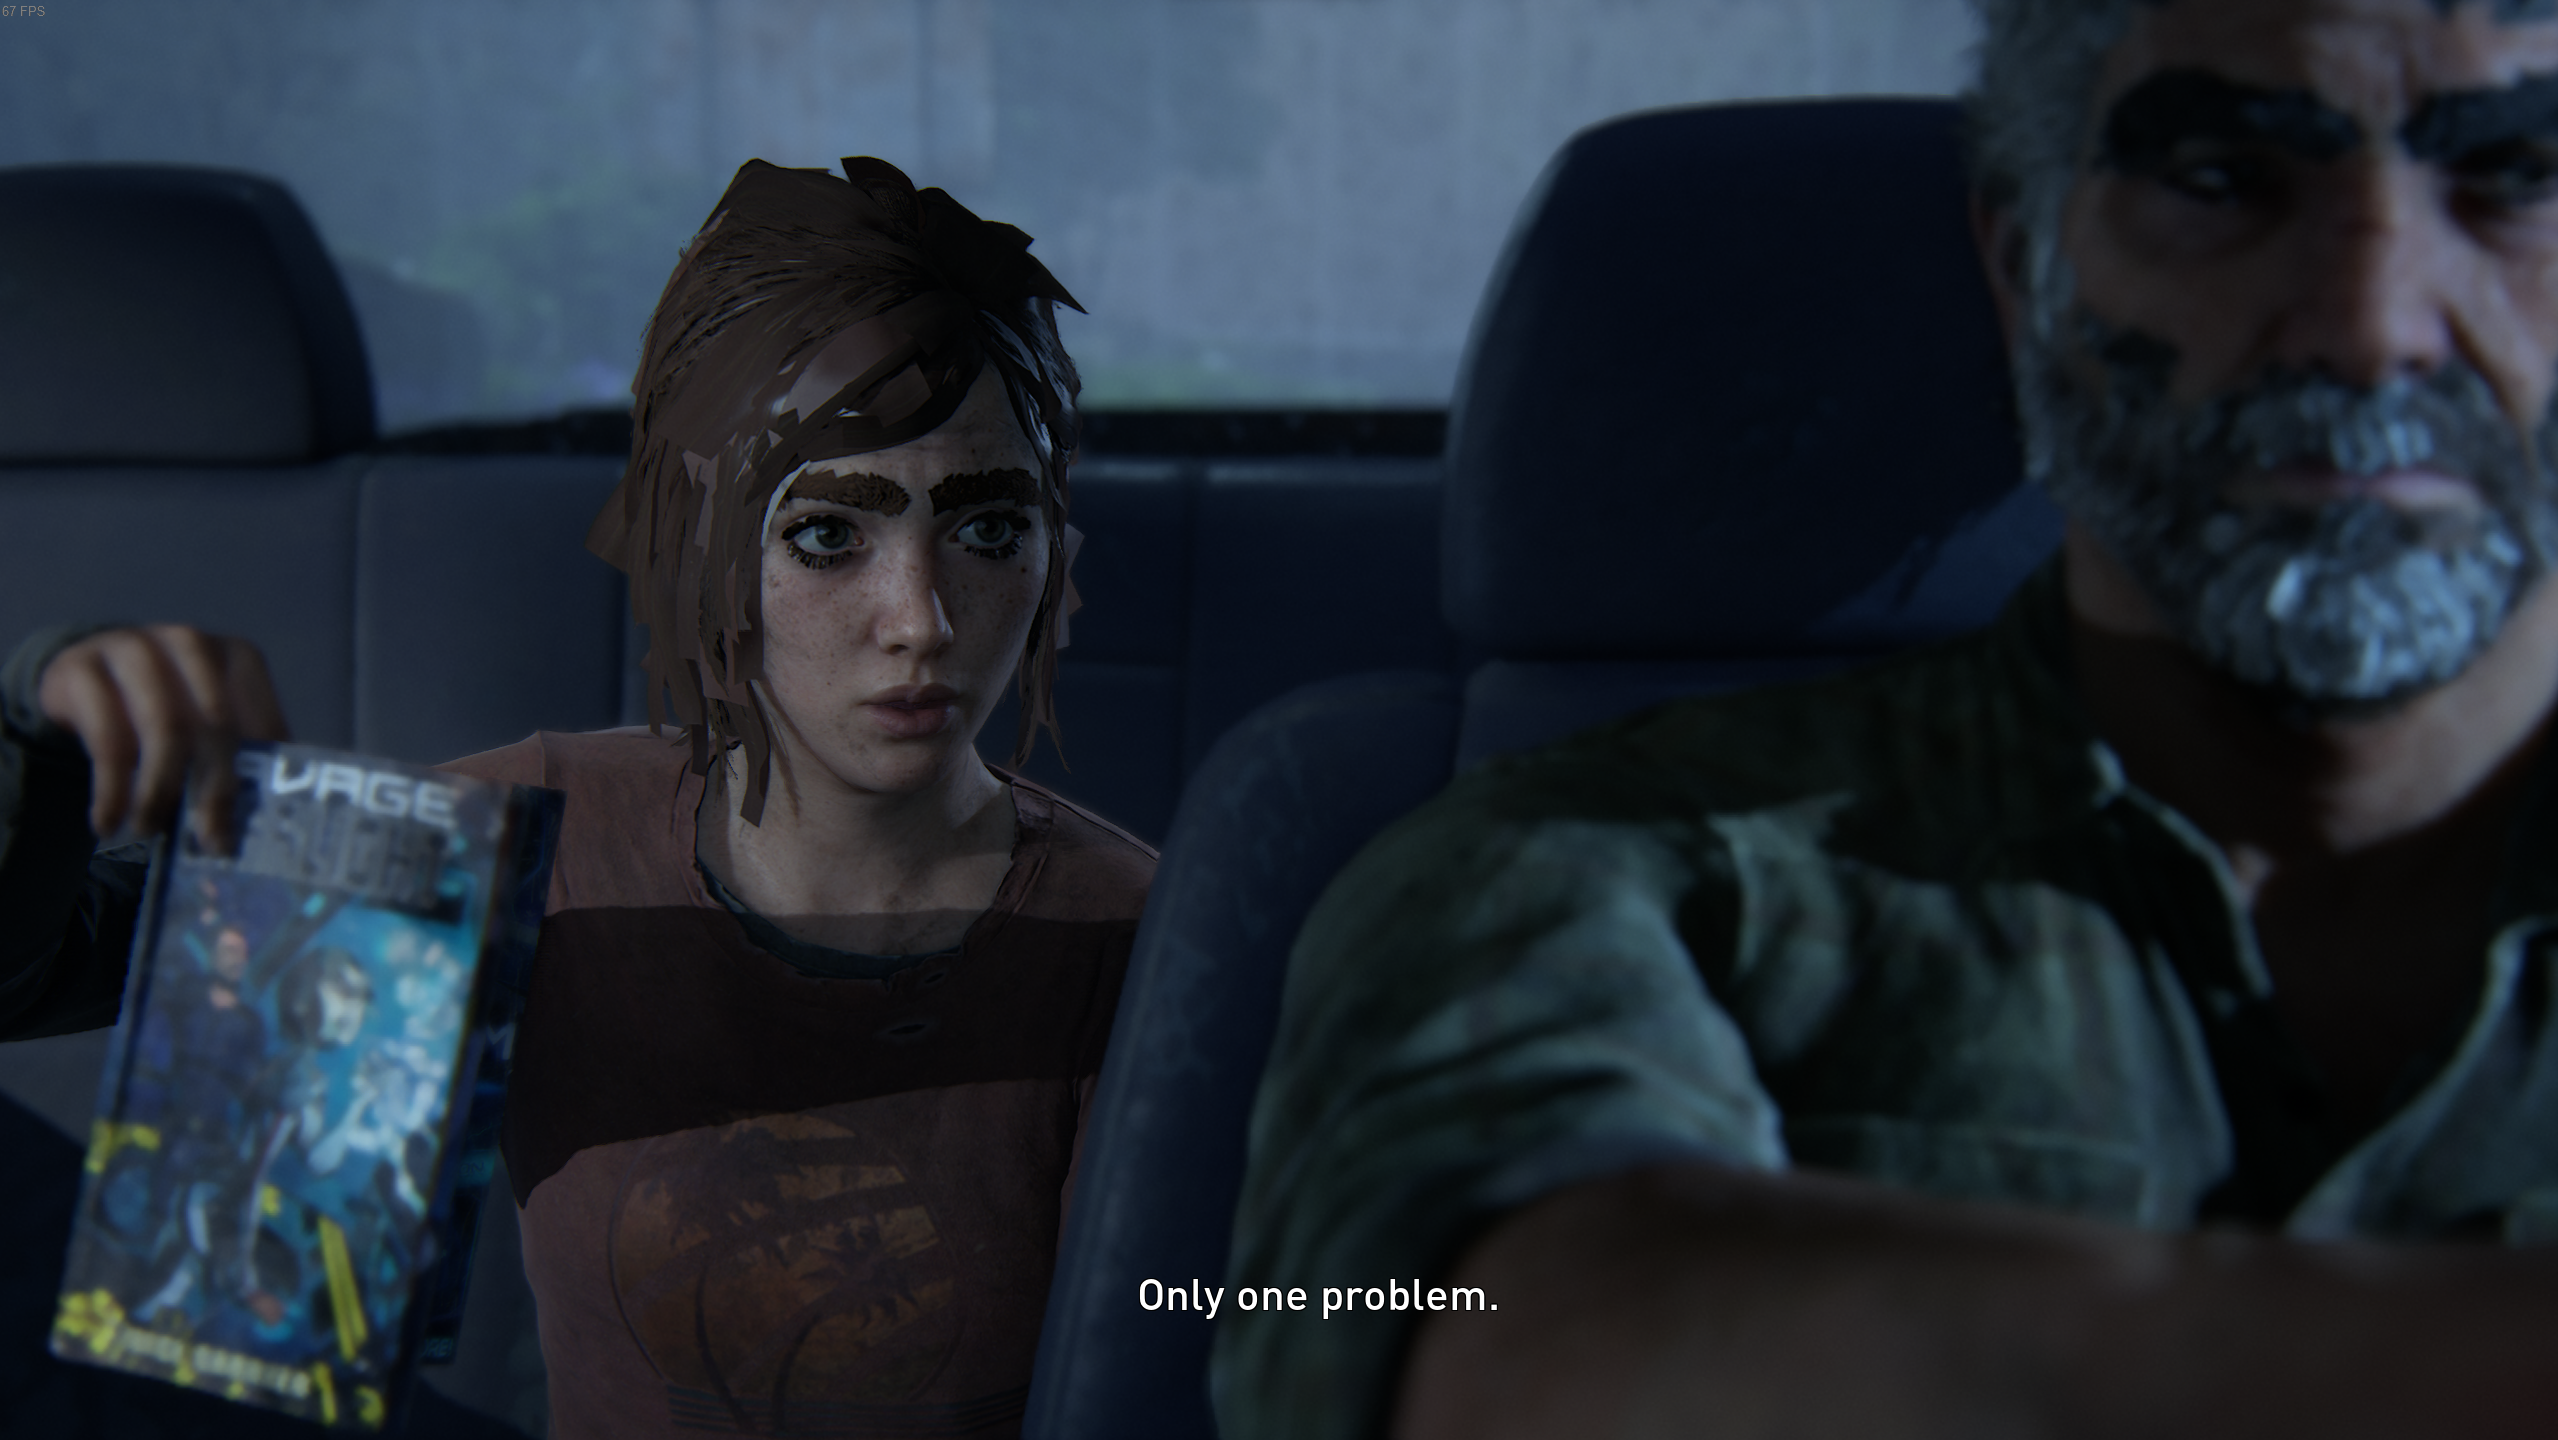 The Last of Us Part 1 PC Crash: The Best Fix You Can Apply